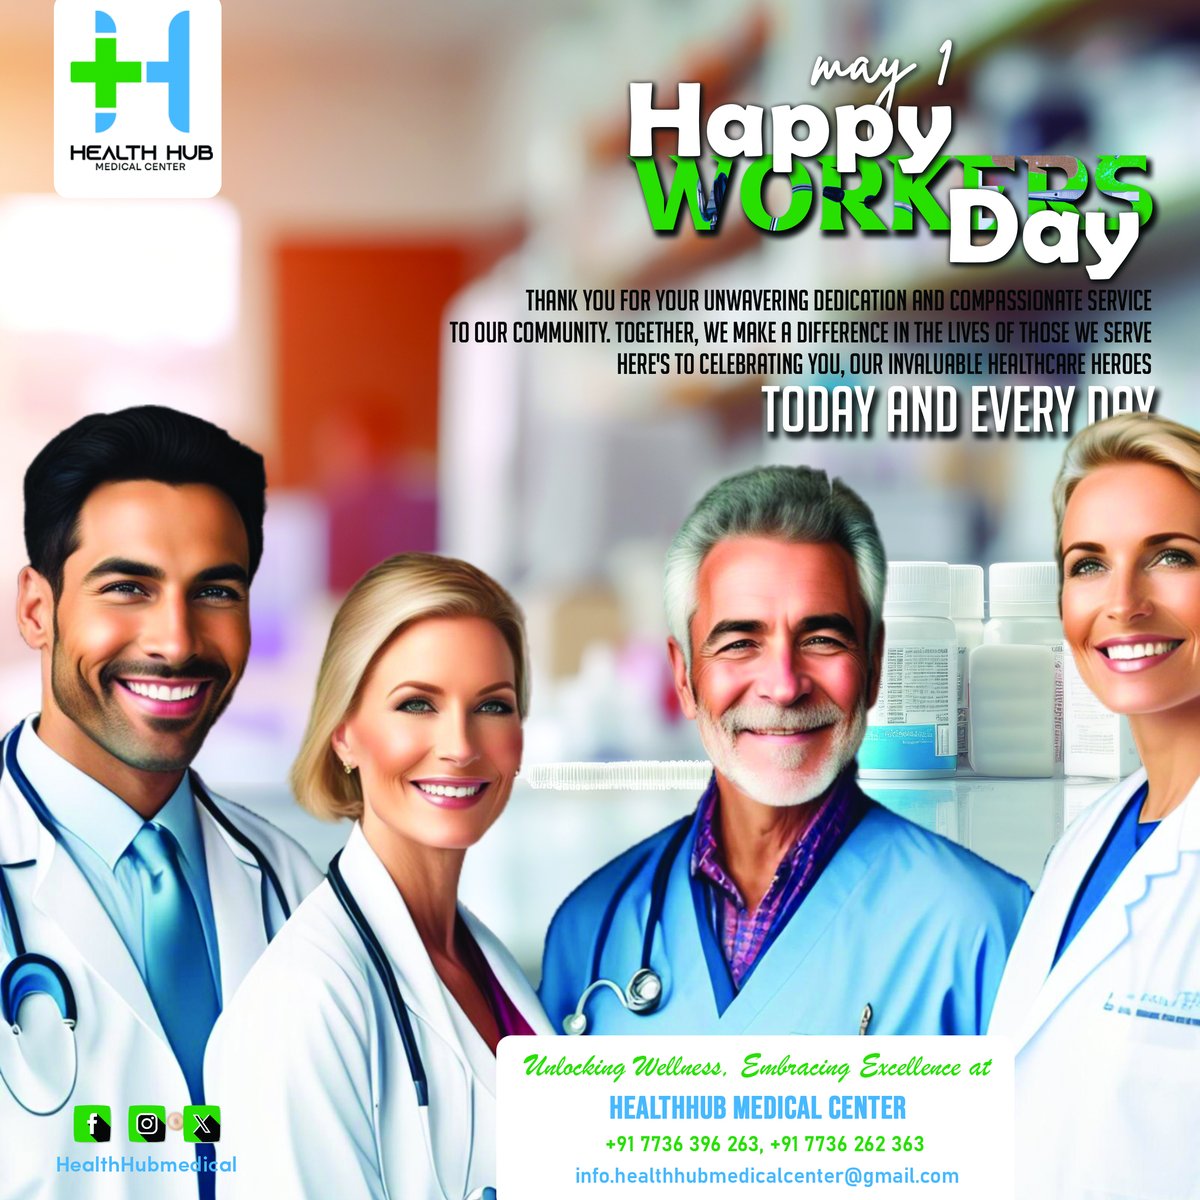 Let’s take a moment to appreciate all workers on Labour Day!

International Workers Day

May 1

#respectworkers #internationalworkersday #doctors #nurses #hospitalstaff #hospital